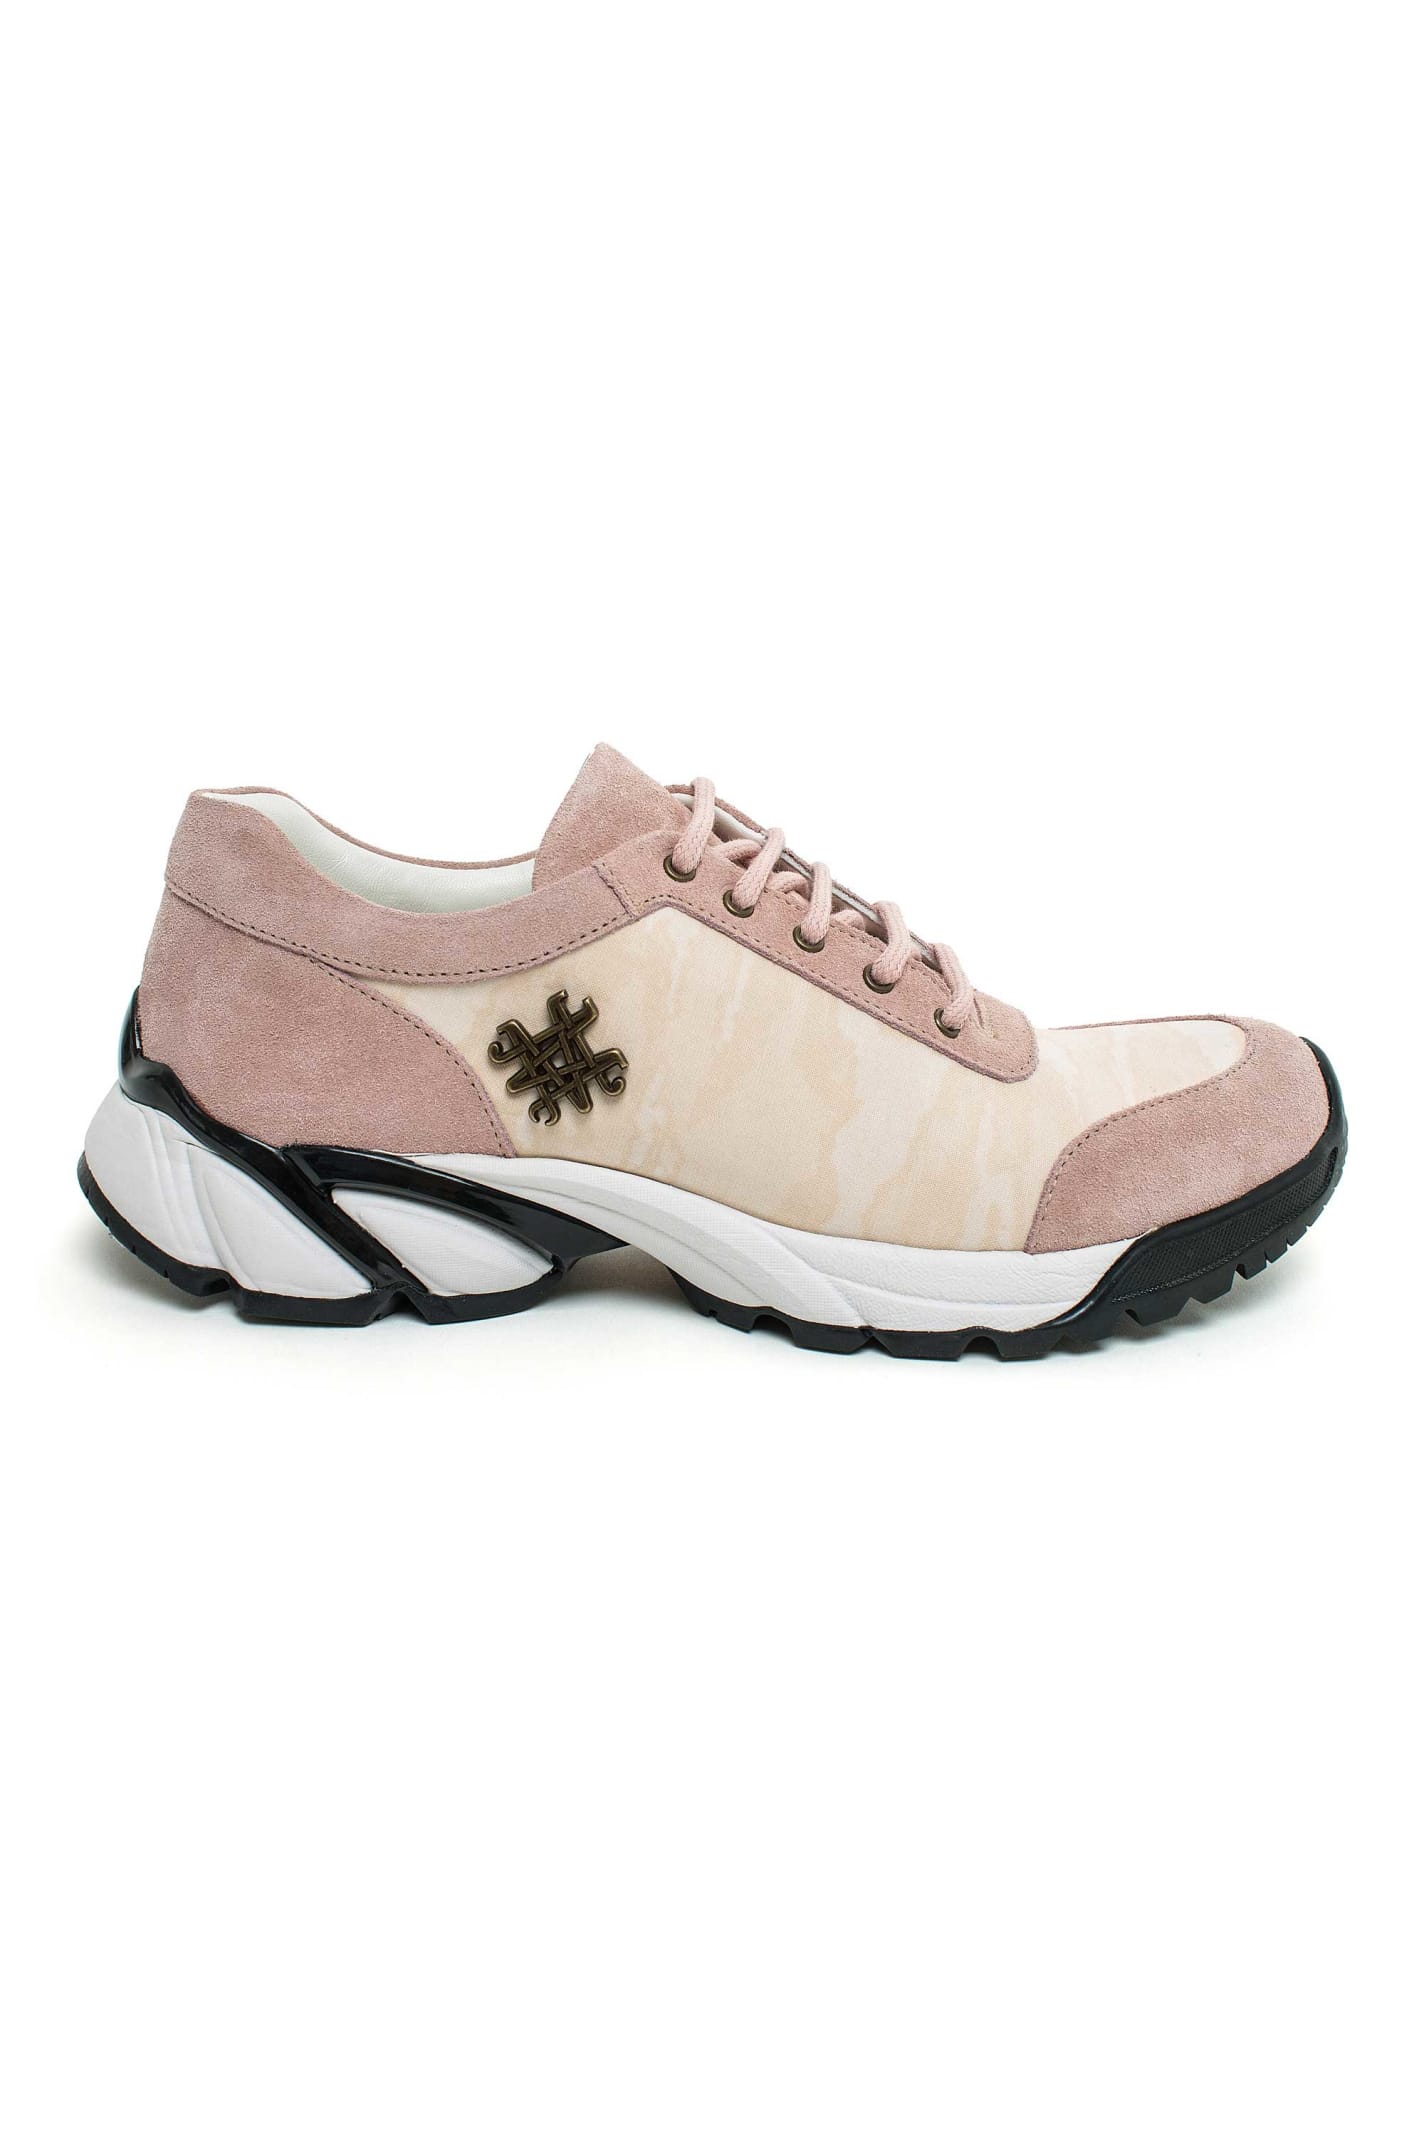 Mr & Mrs Italy Camou Canvas Sneakers